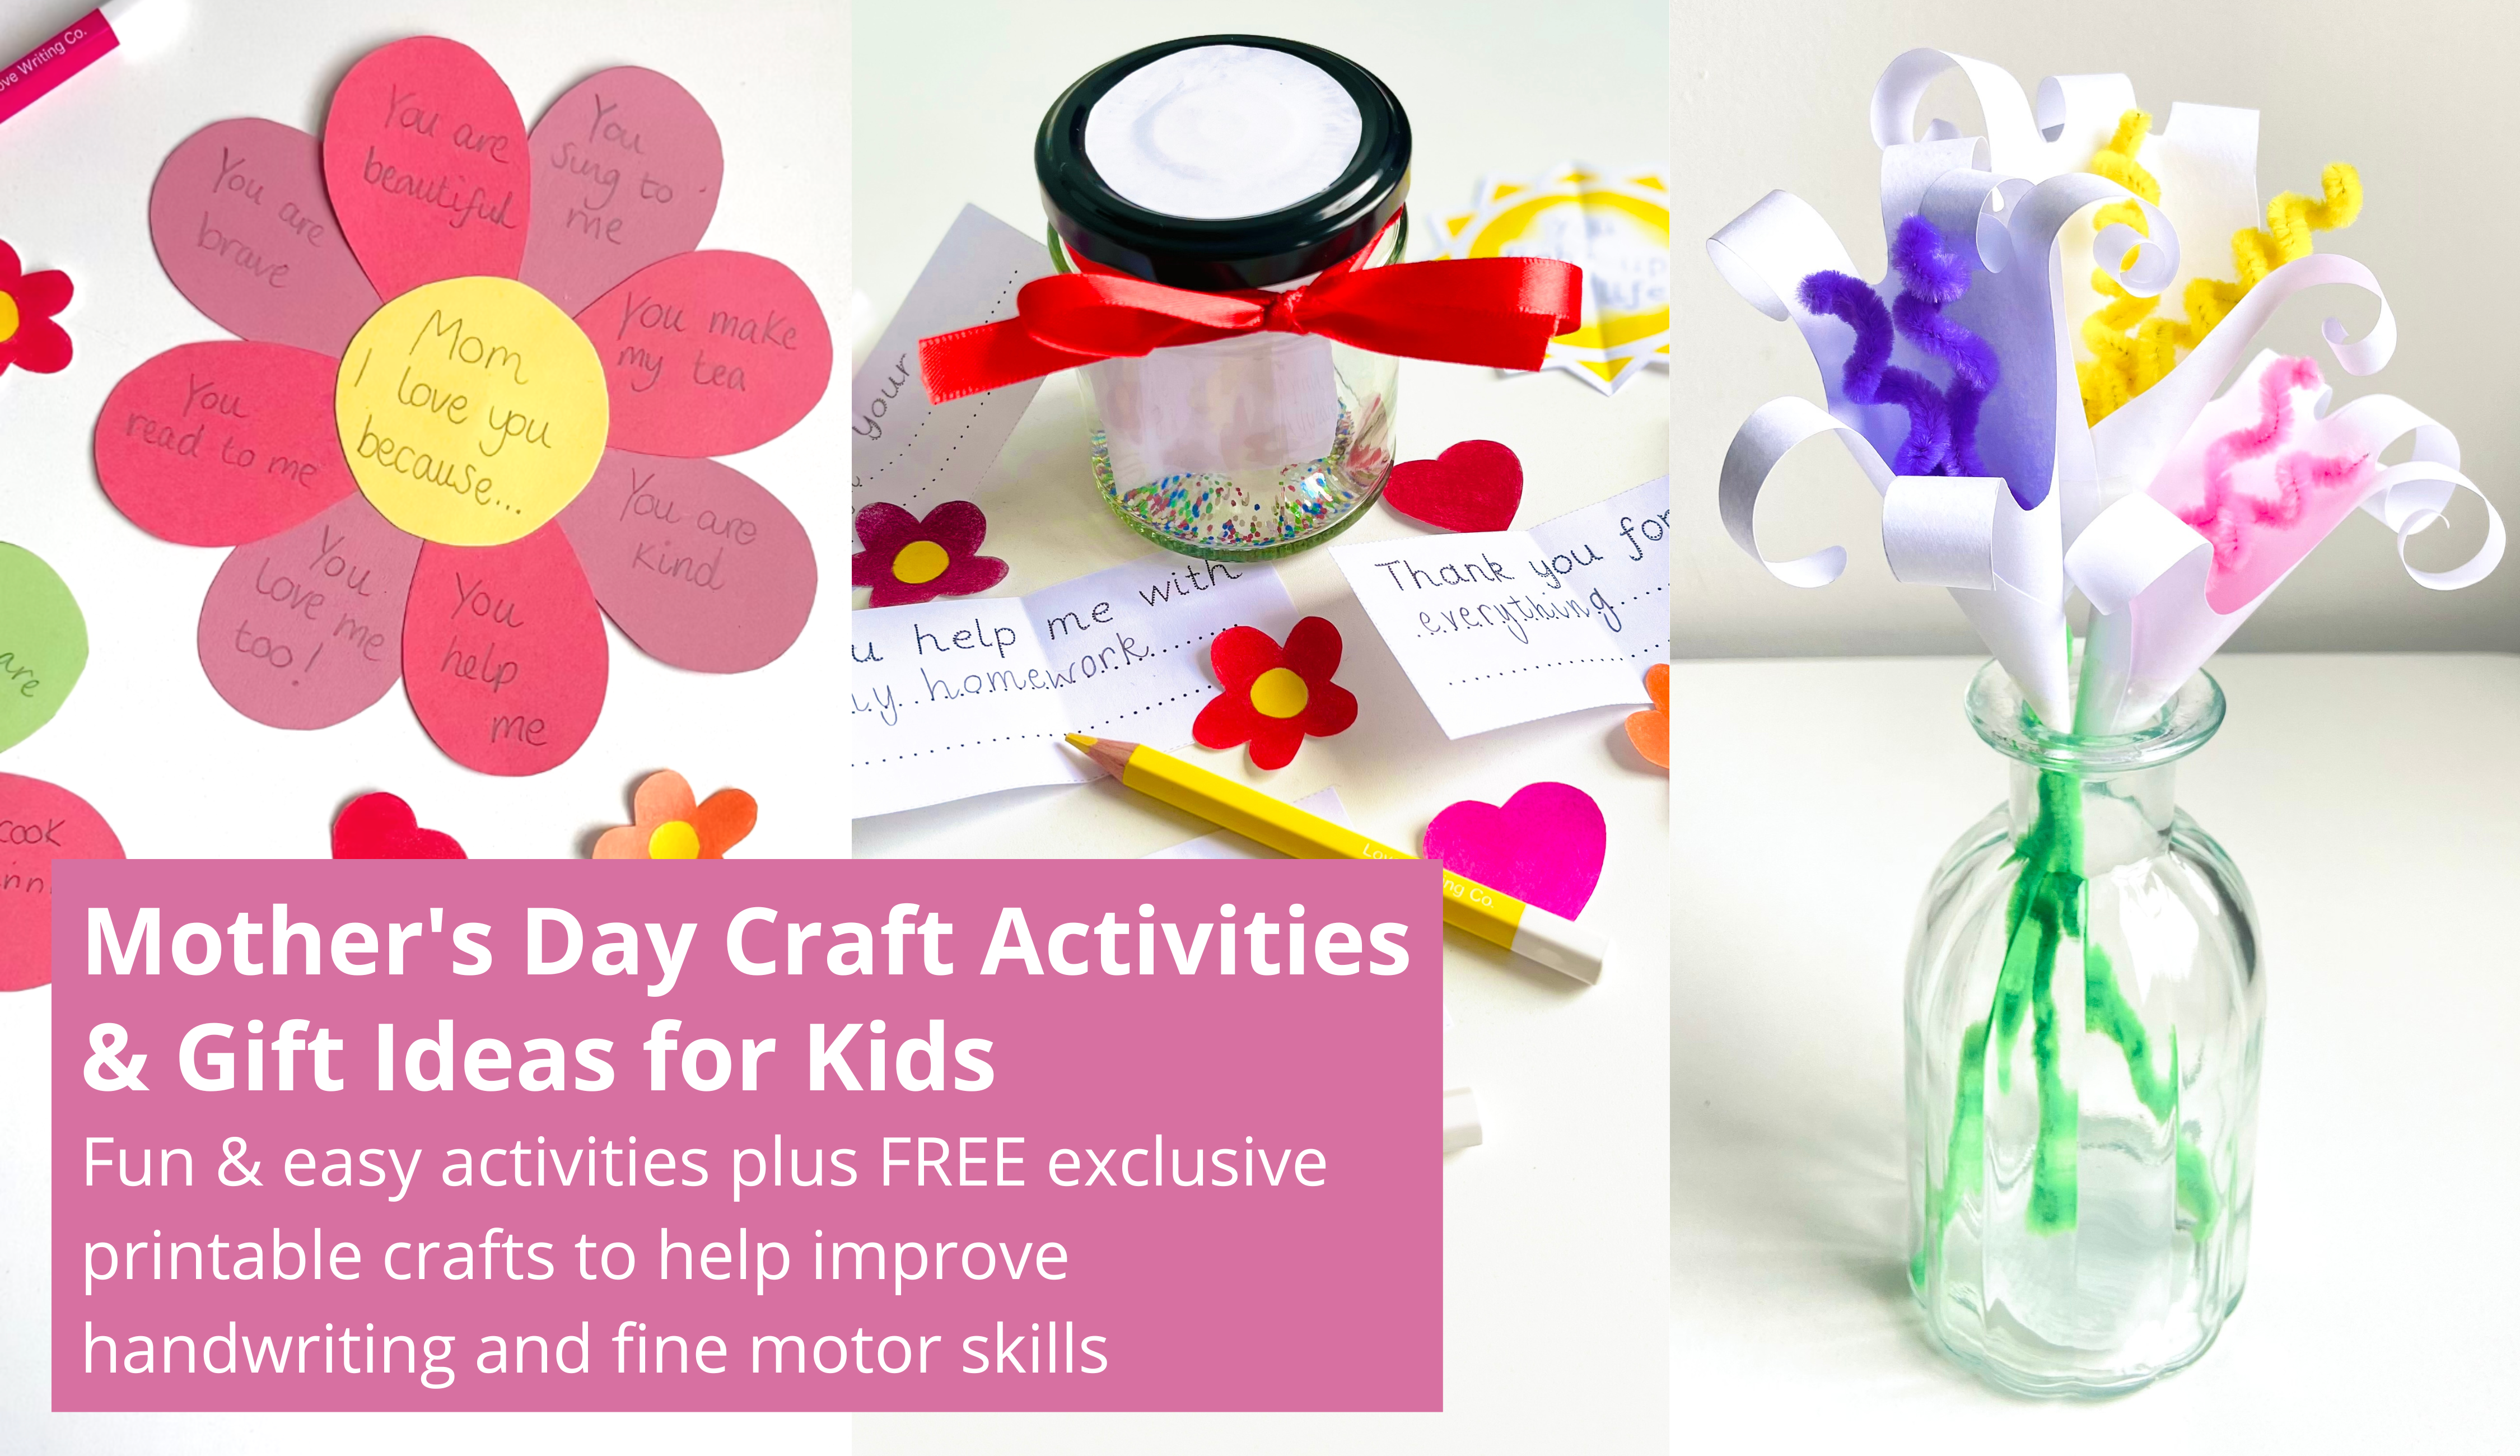 Crafts for Kids - Fun Kids Crafts With Instructions